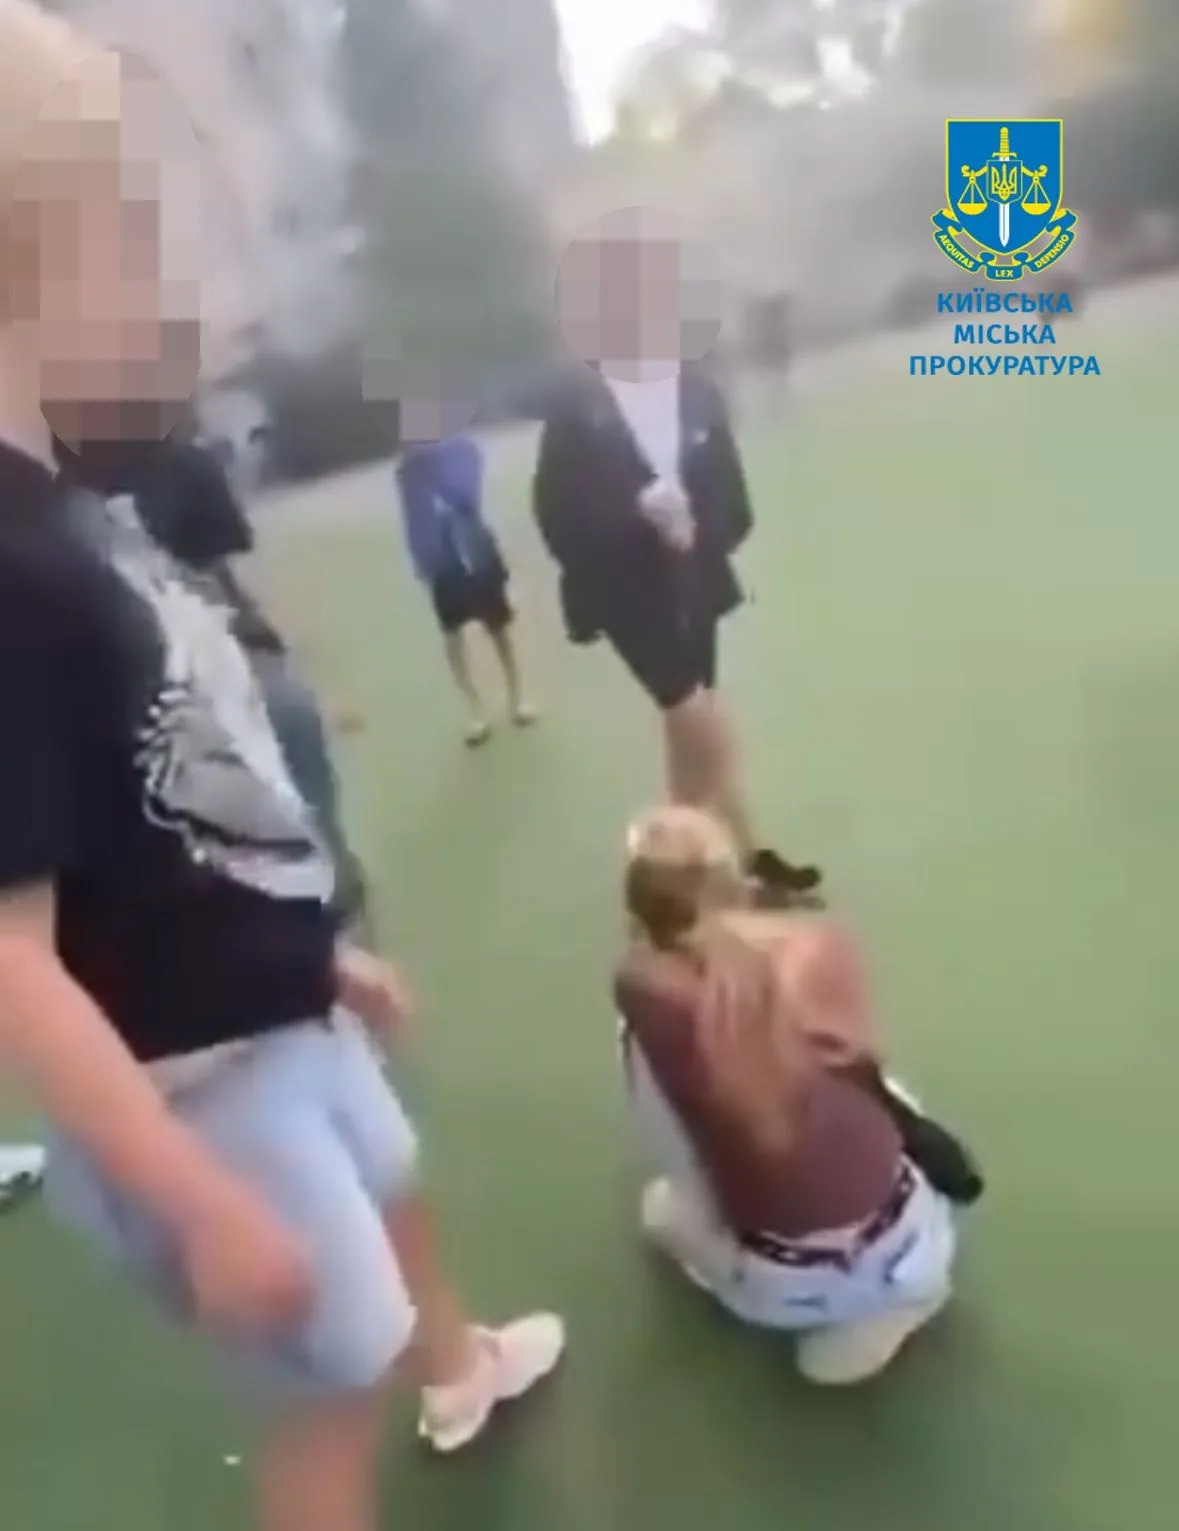 In Kyiv filmed the beating of a schoolgirl by a group of teenagers: three girls were identified, an investigation was launched